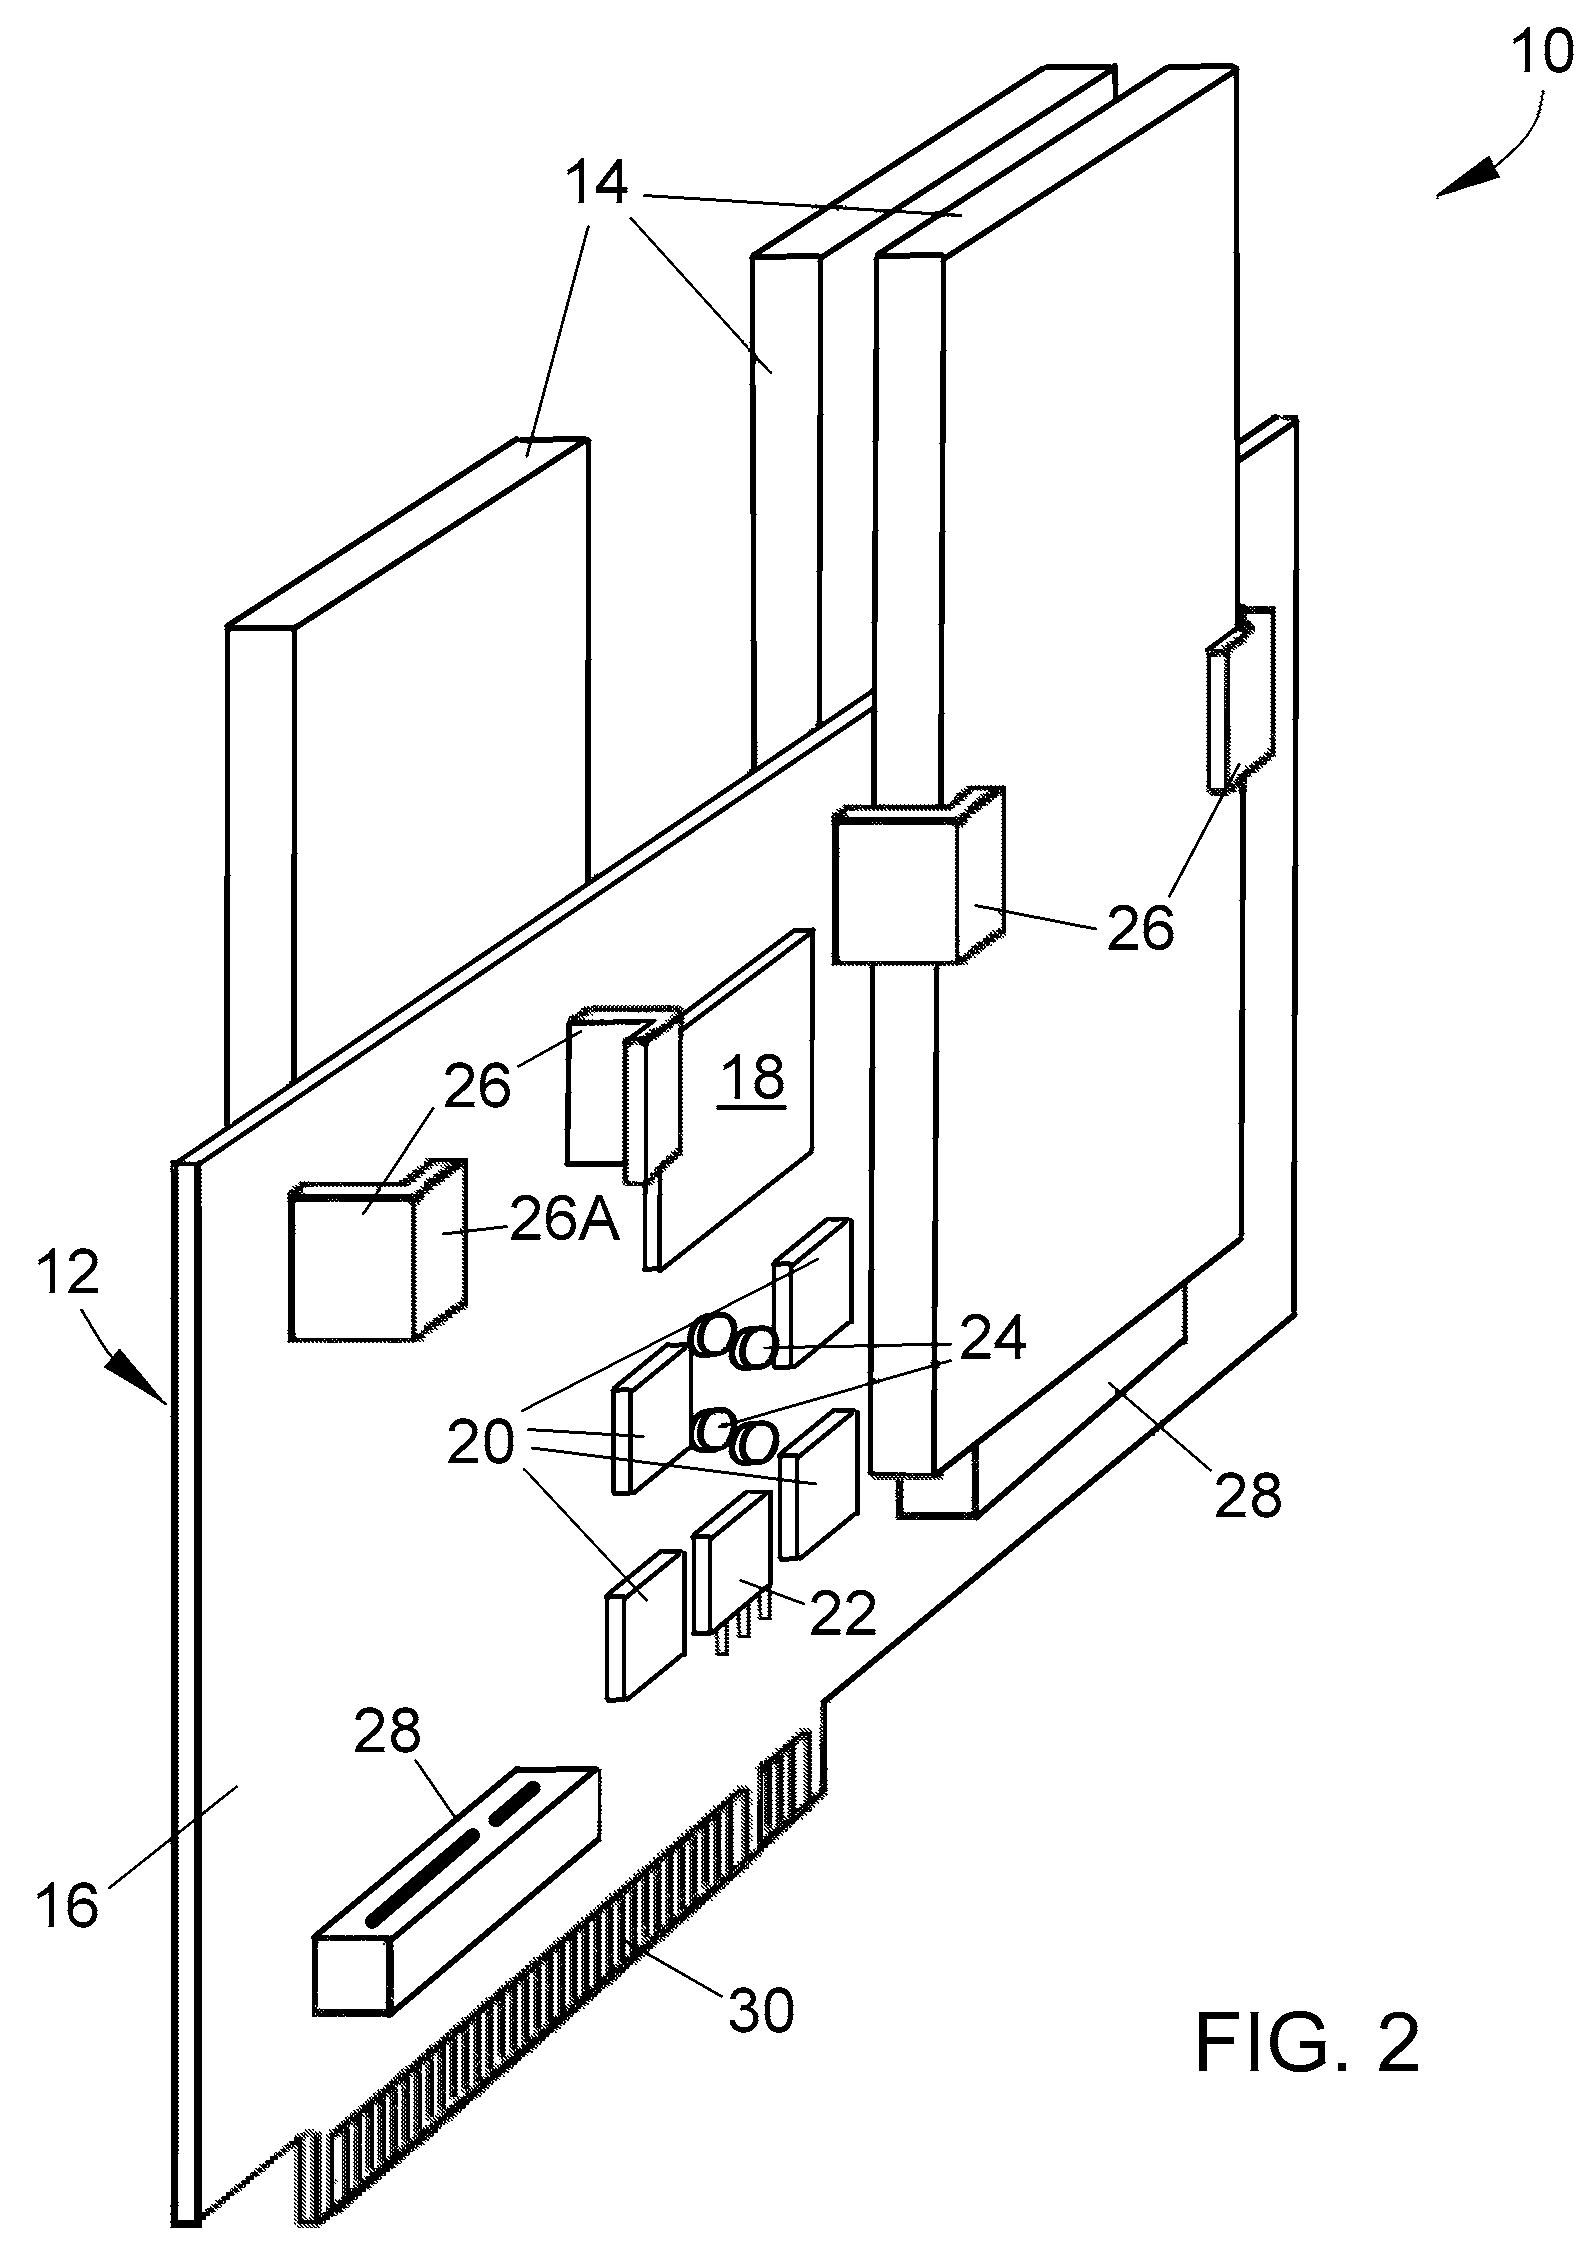 Modular mass storage system and method therefor